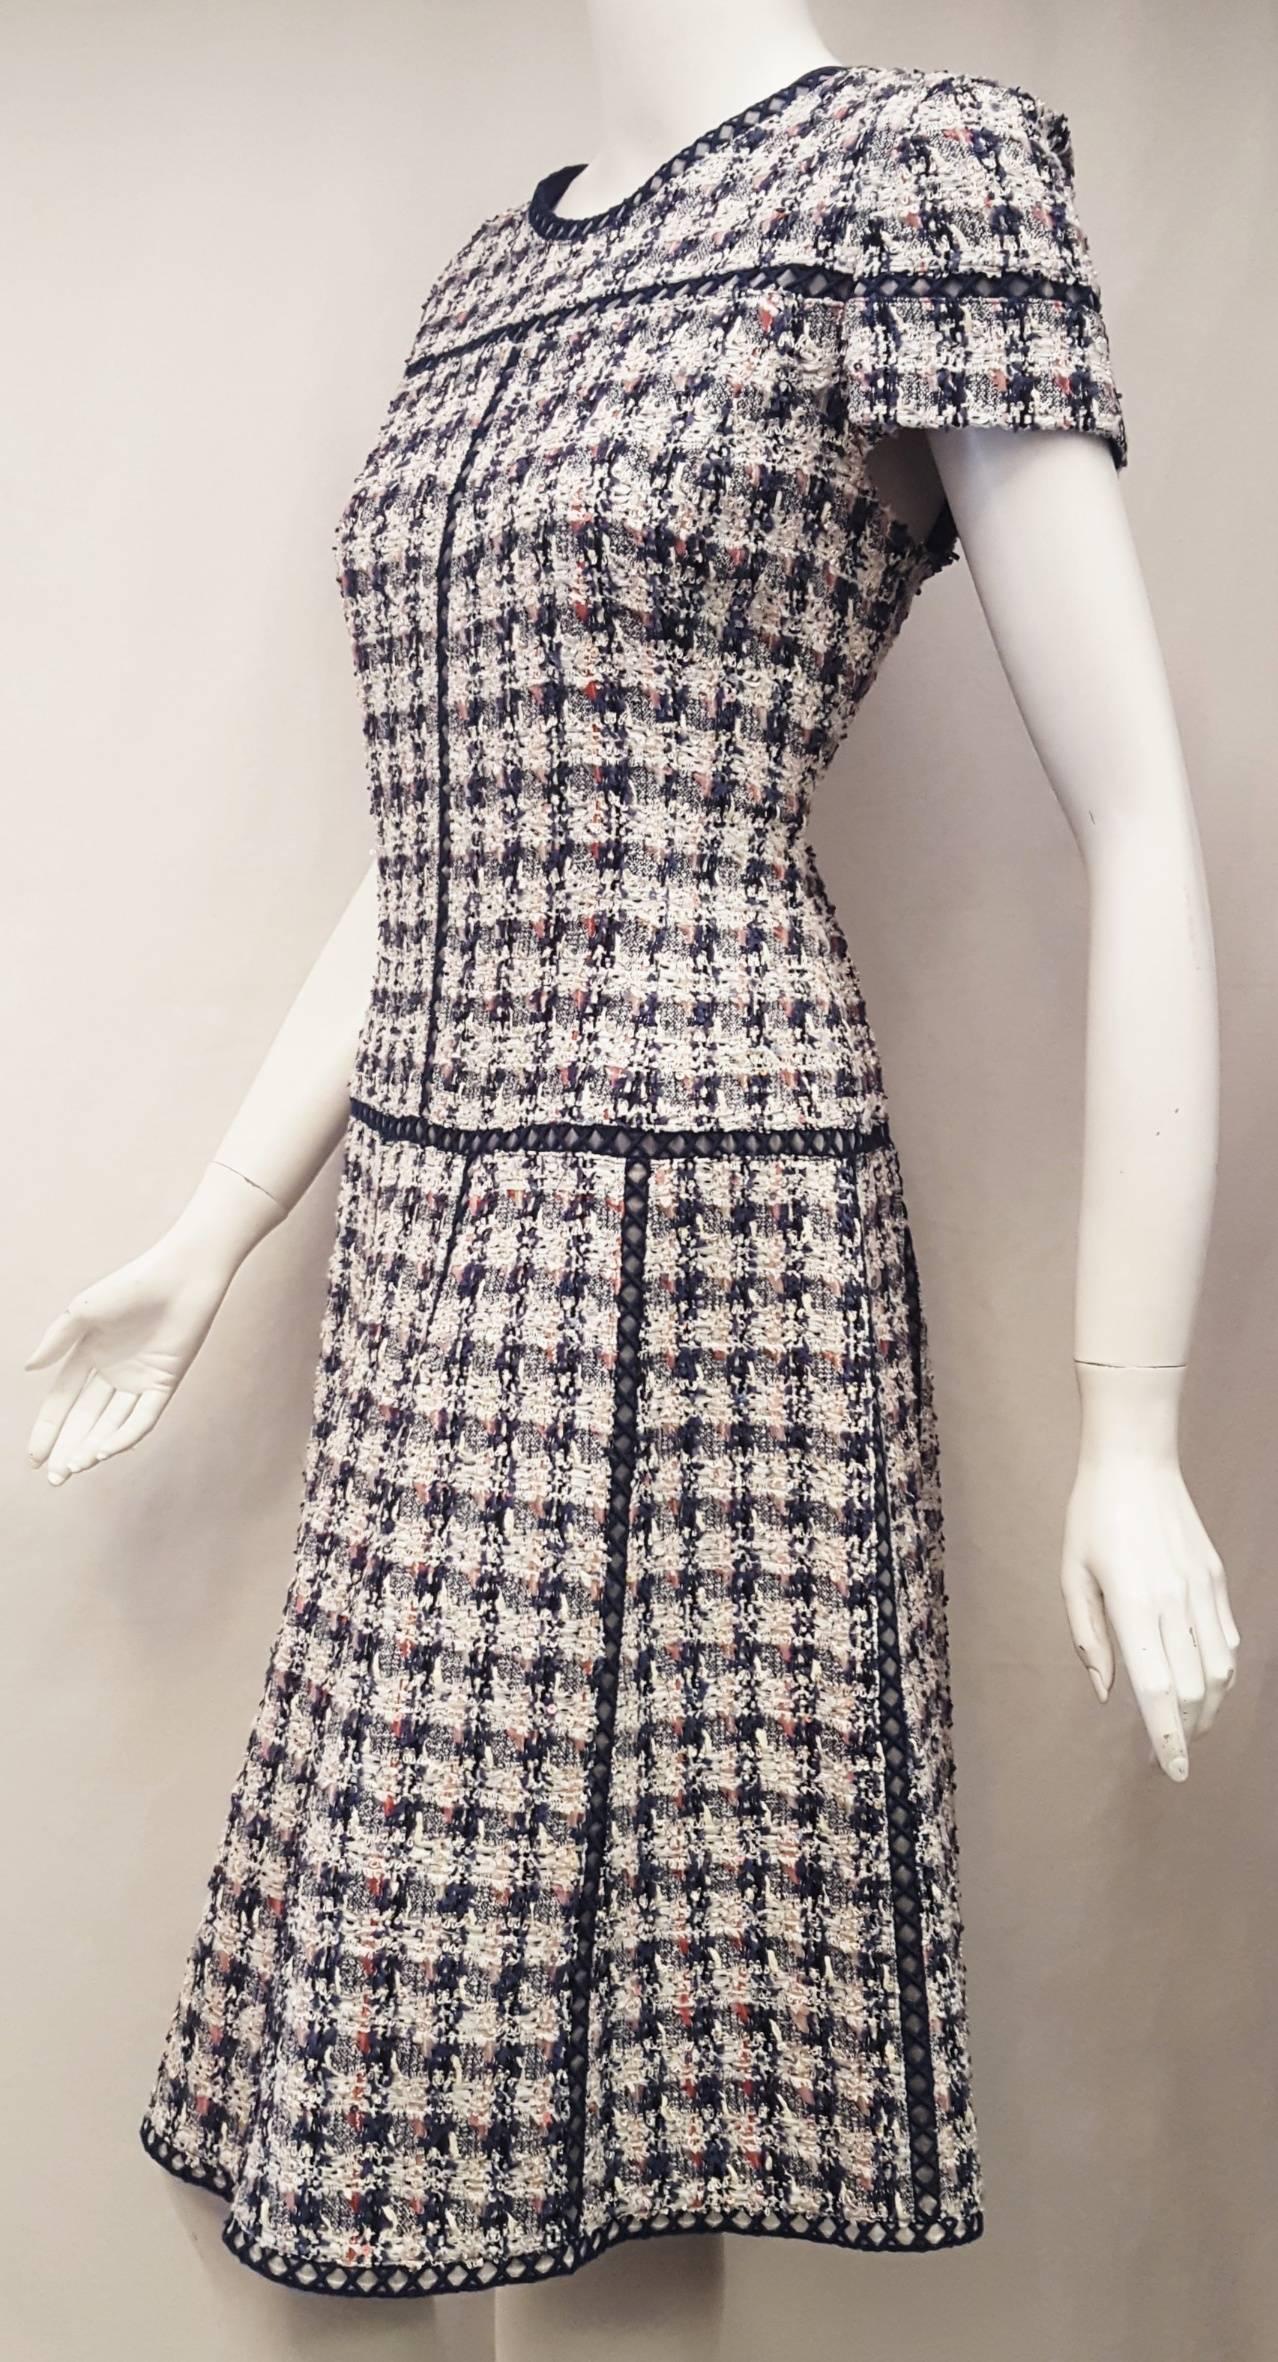 This stunning lightweight tweed Oscar de la Renta can take you through all the seasons of the year.  With classic tailoring and attention to detail, this marvelous dress can go from day to night and travels easily.  Another elegant creation from the